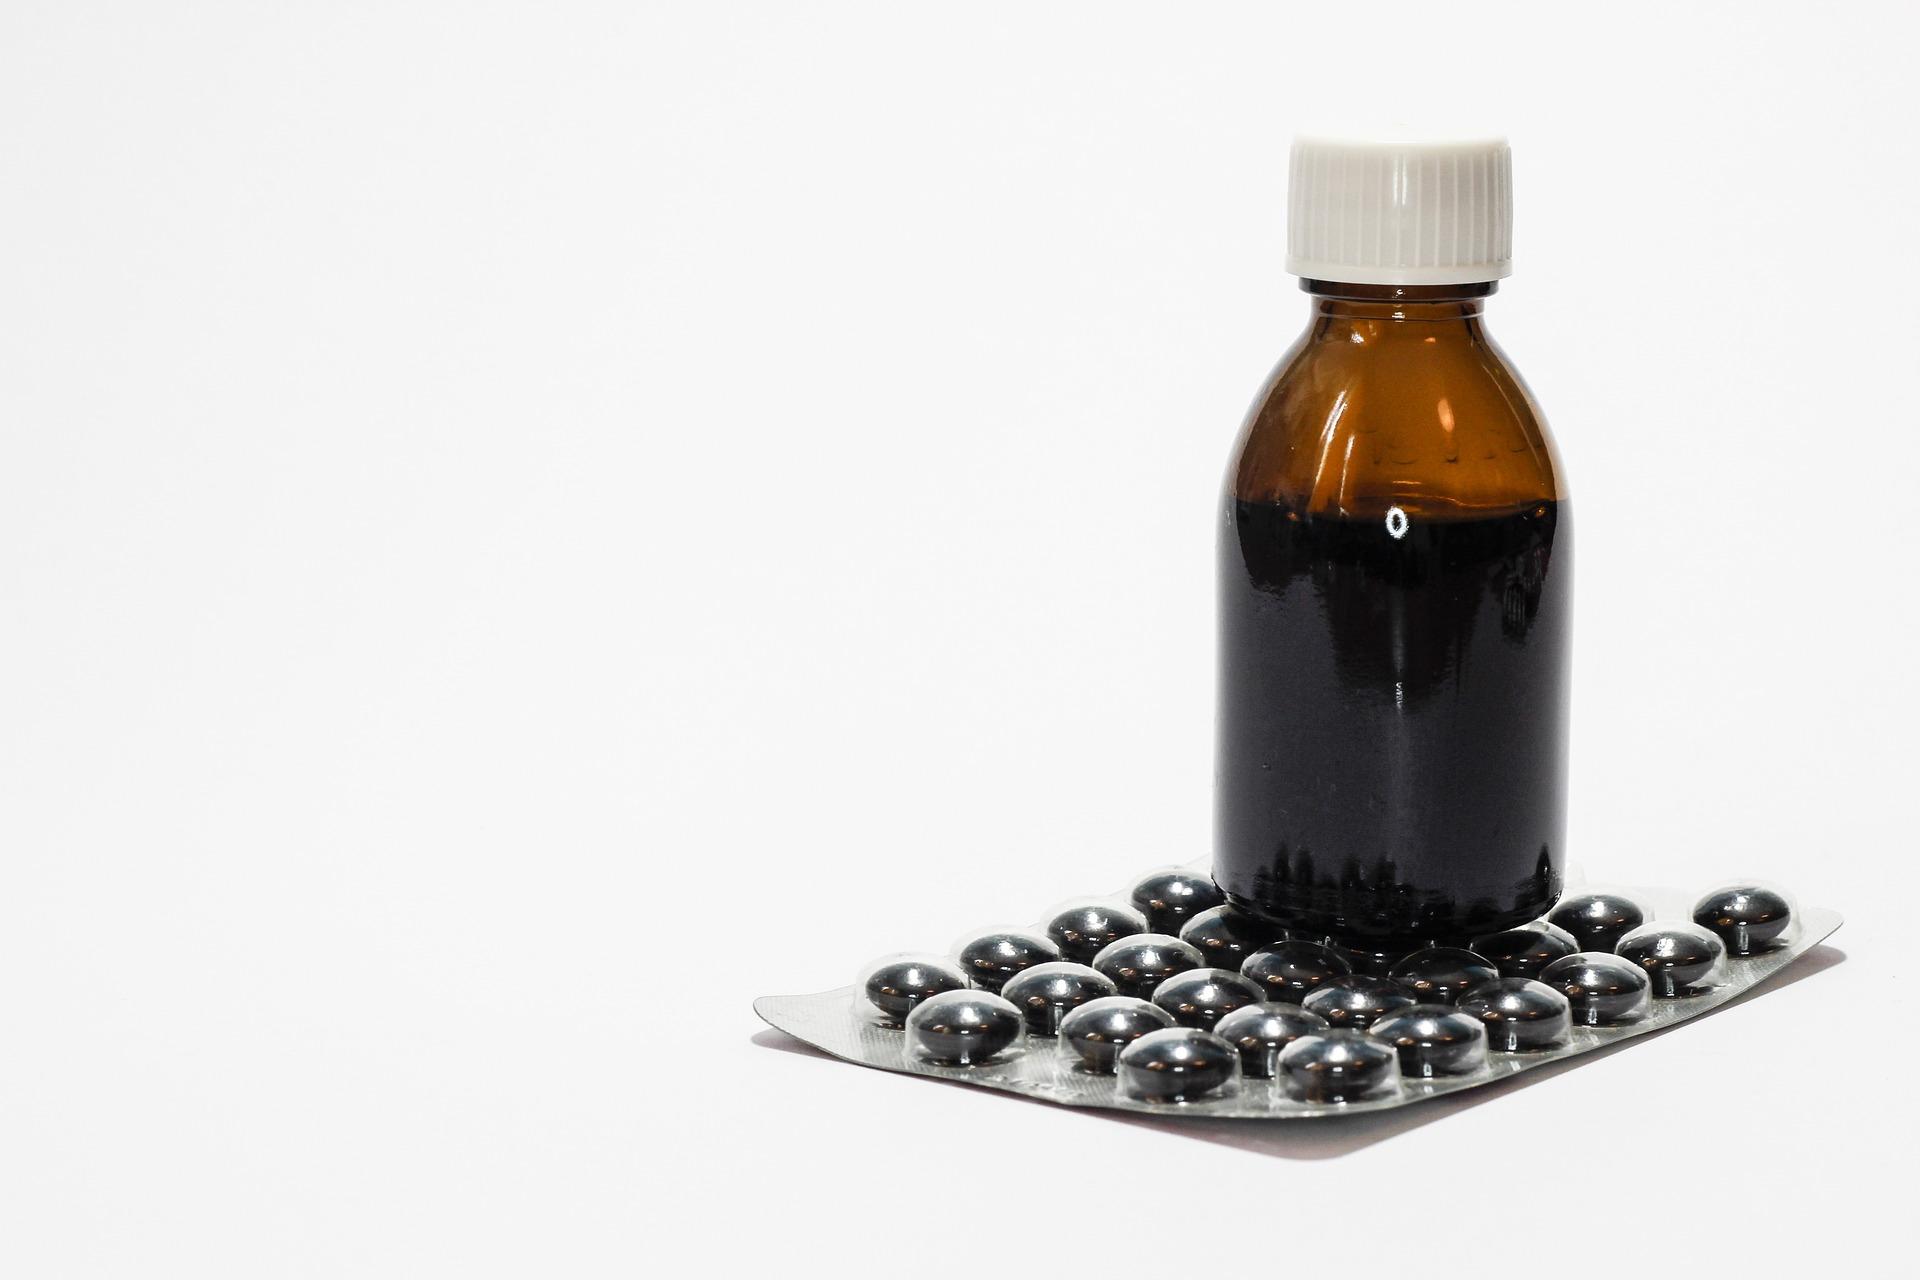 Delta 8 syrup is effective in treating chronic pain.